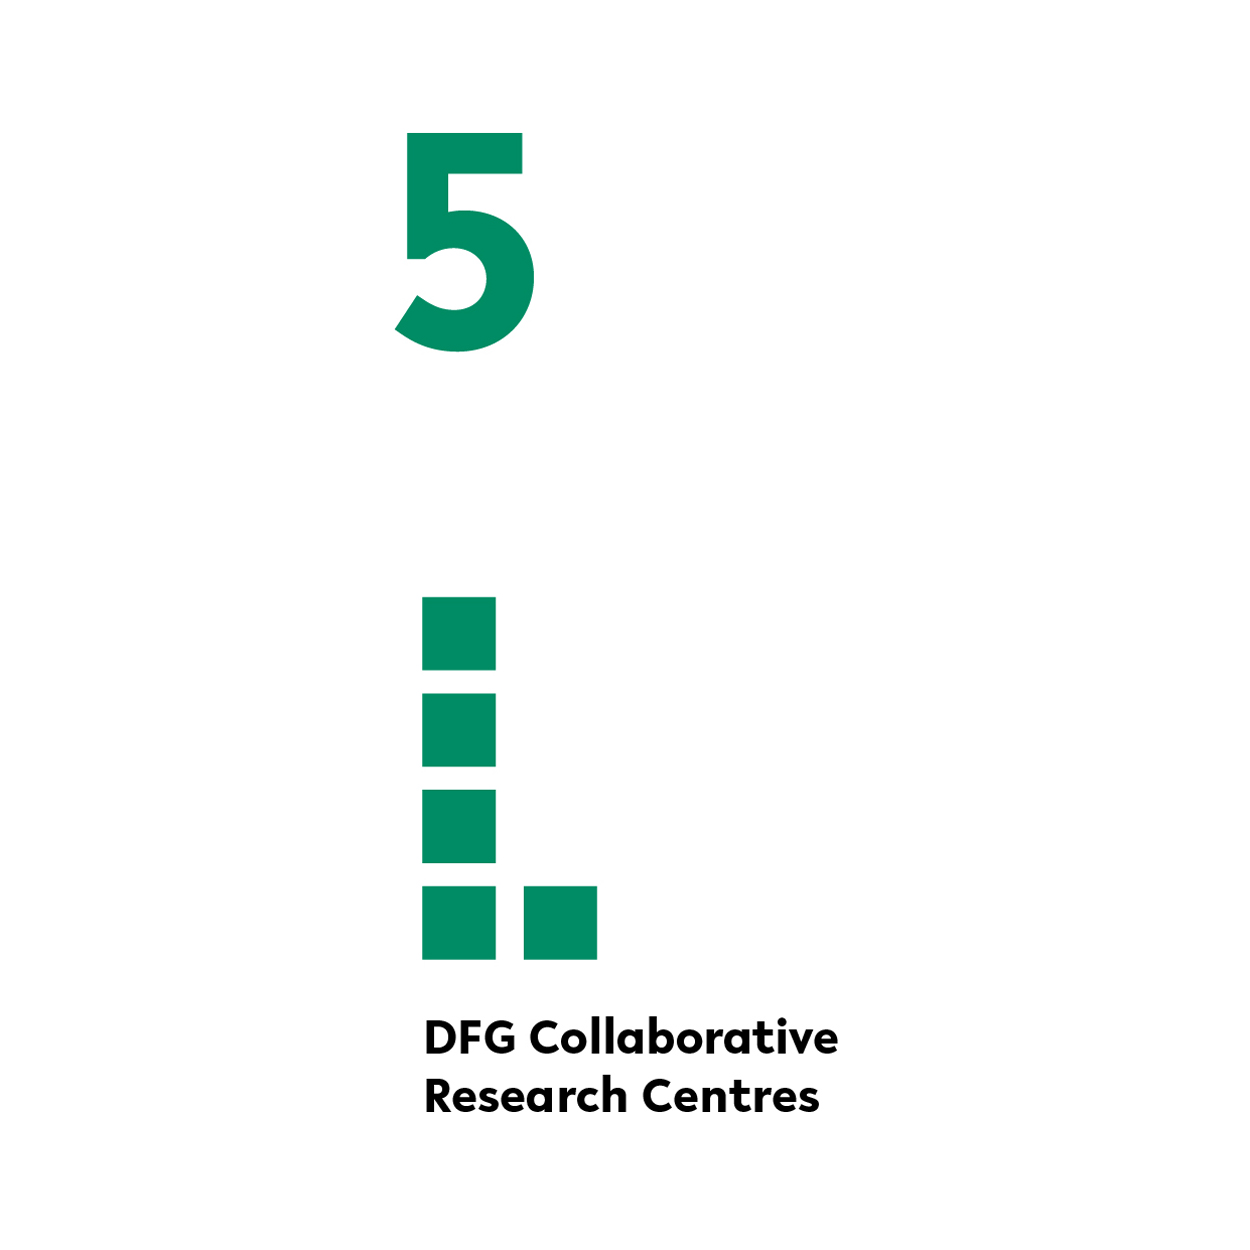 Six German Research Foundation Collaborative Research Centers (CRC), and participation in one external CRC.